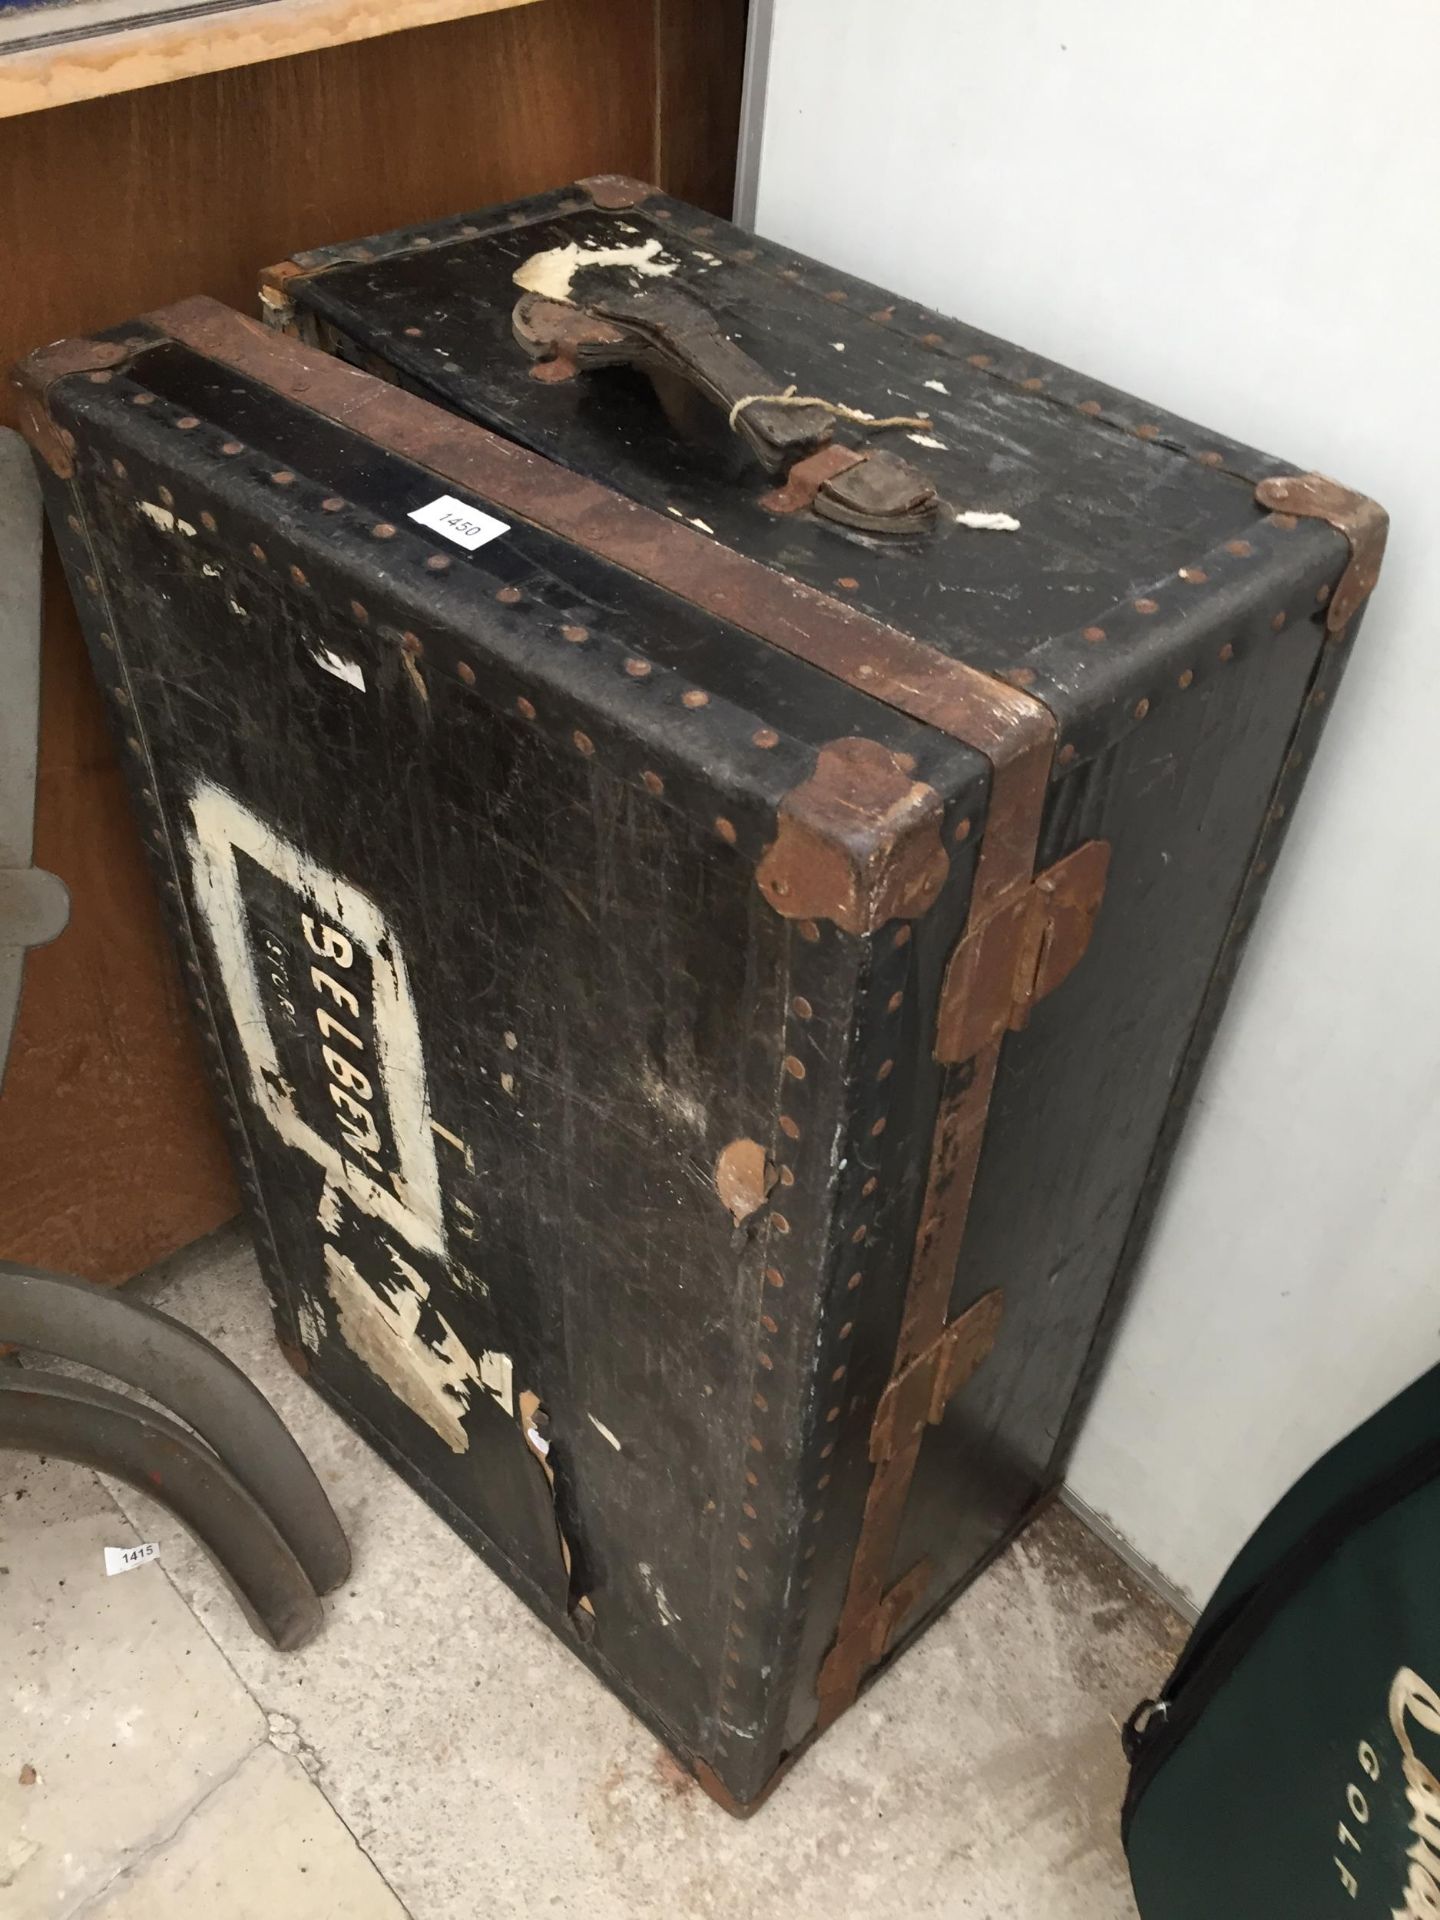 A VINTAGE TRAVEL TRUNK - Image 3 of 4